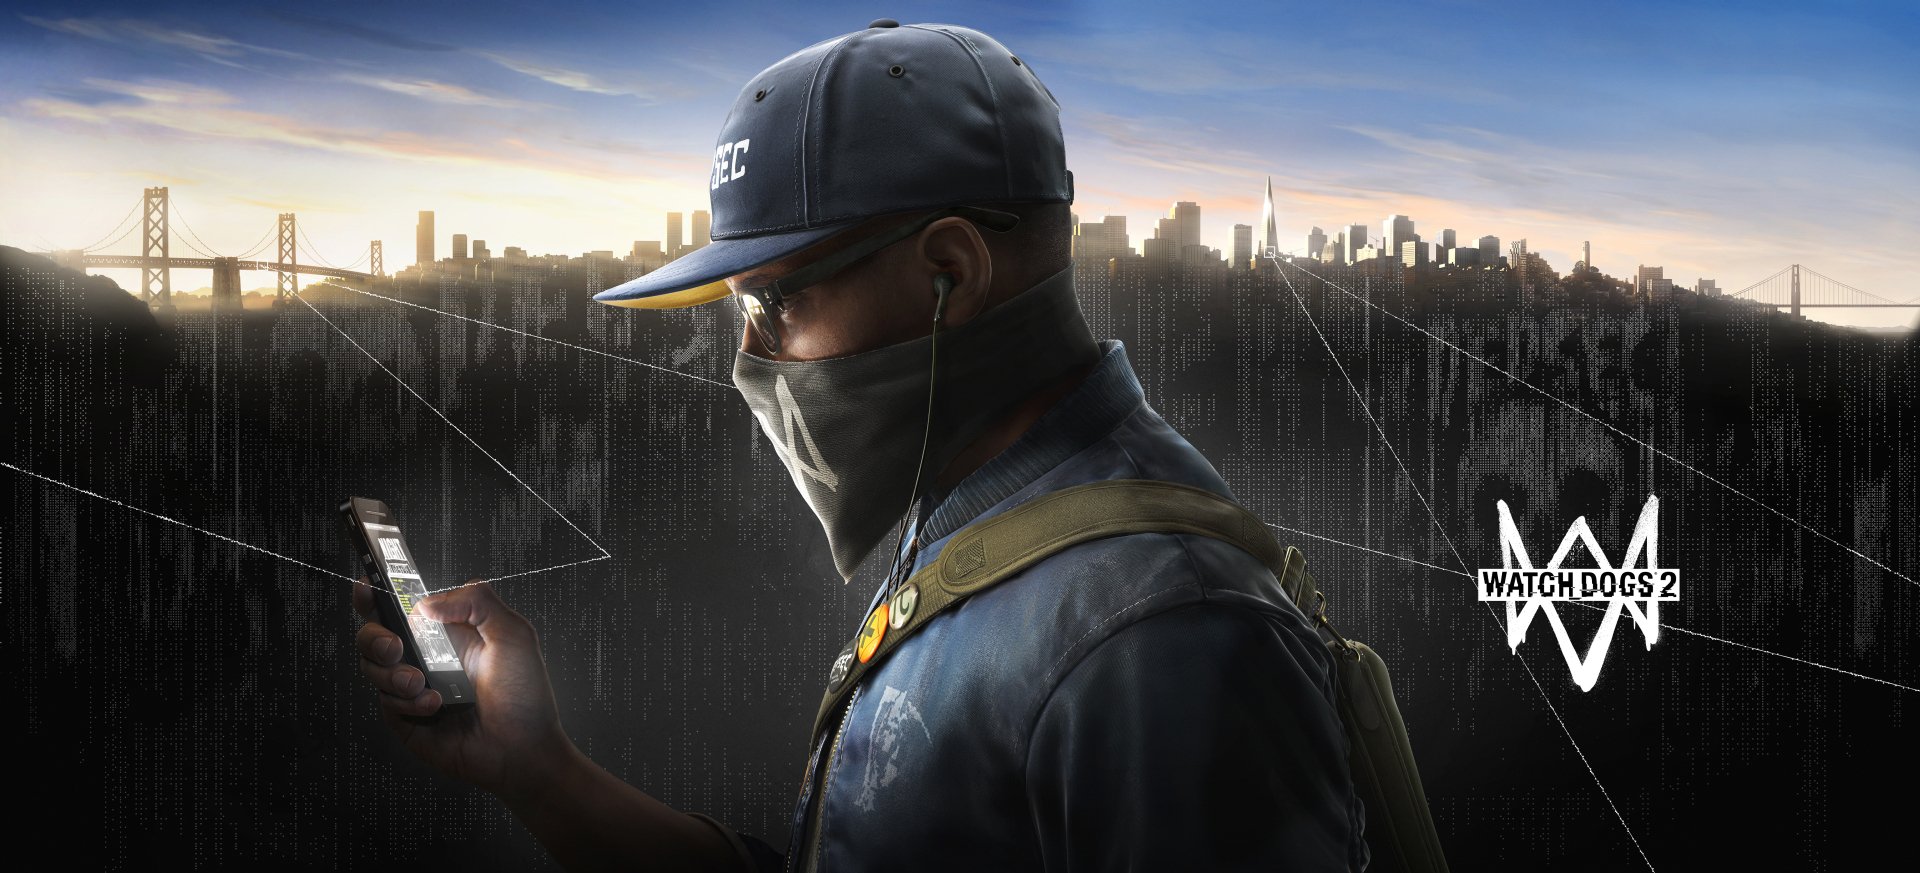 watch dogs 2 pc